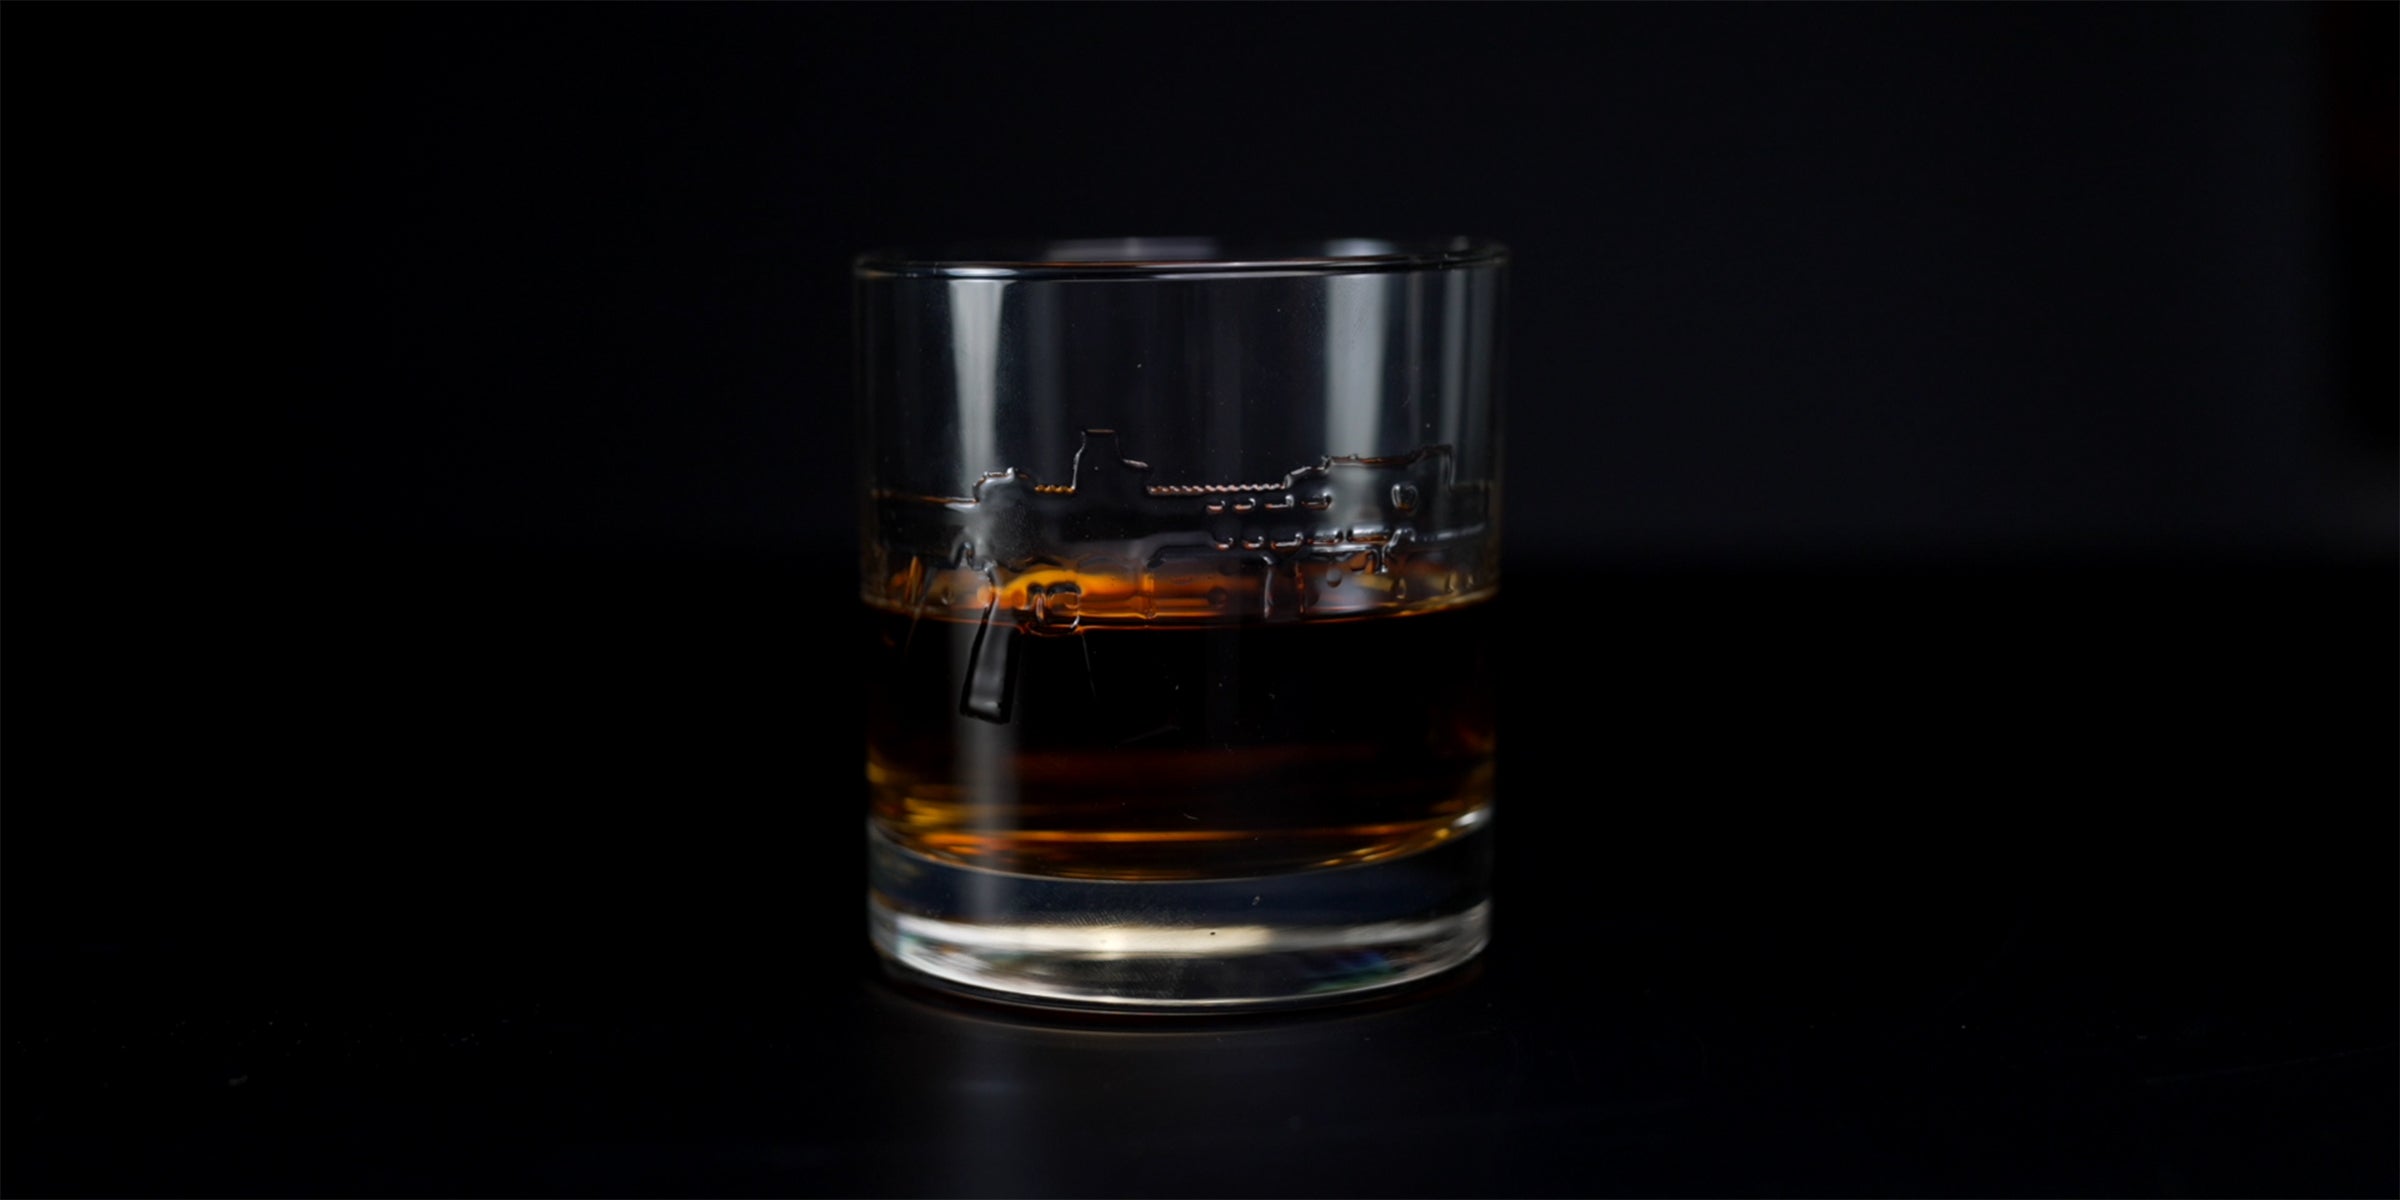 rocks glass embossed with an AR15 rifle, half full with bourbon. black background.